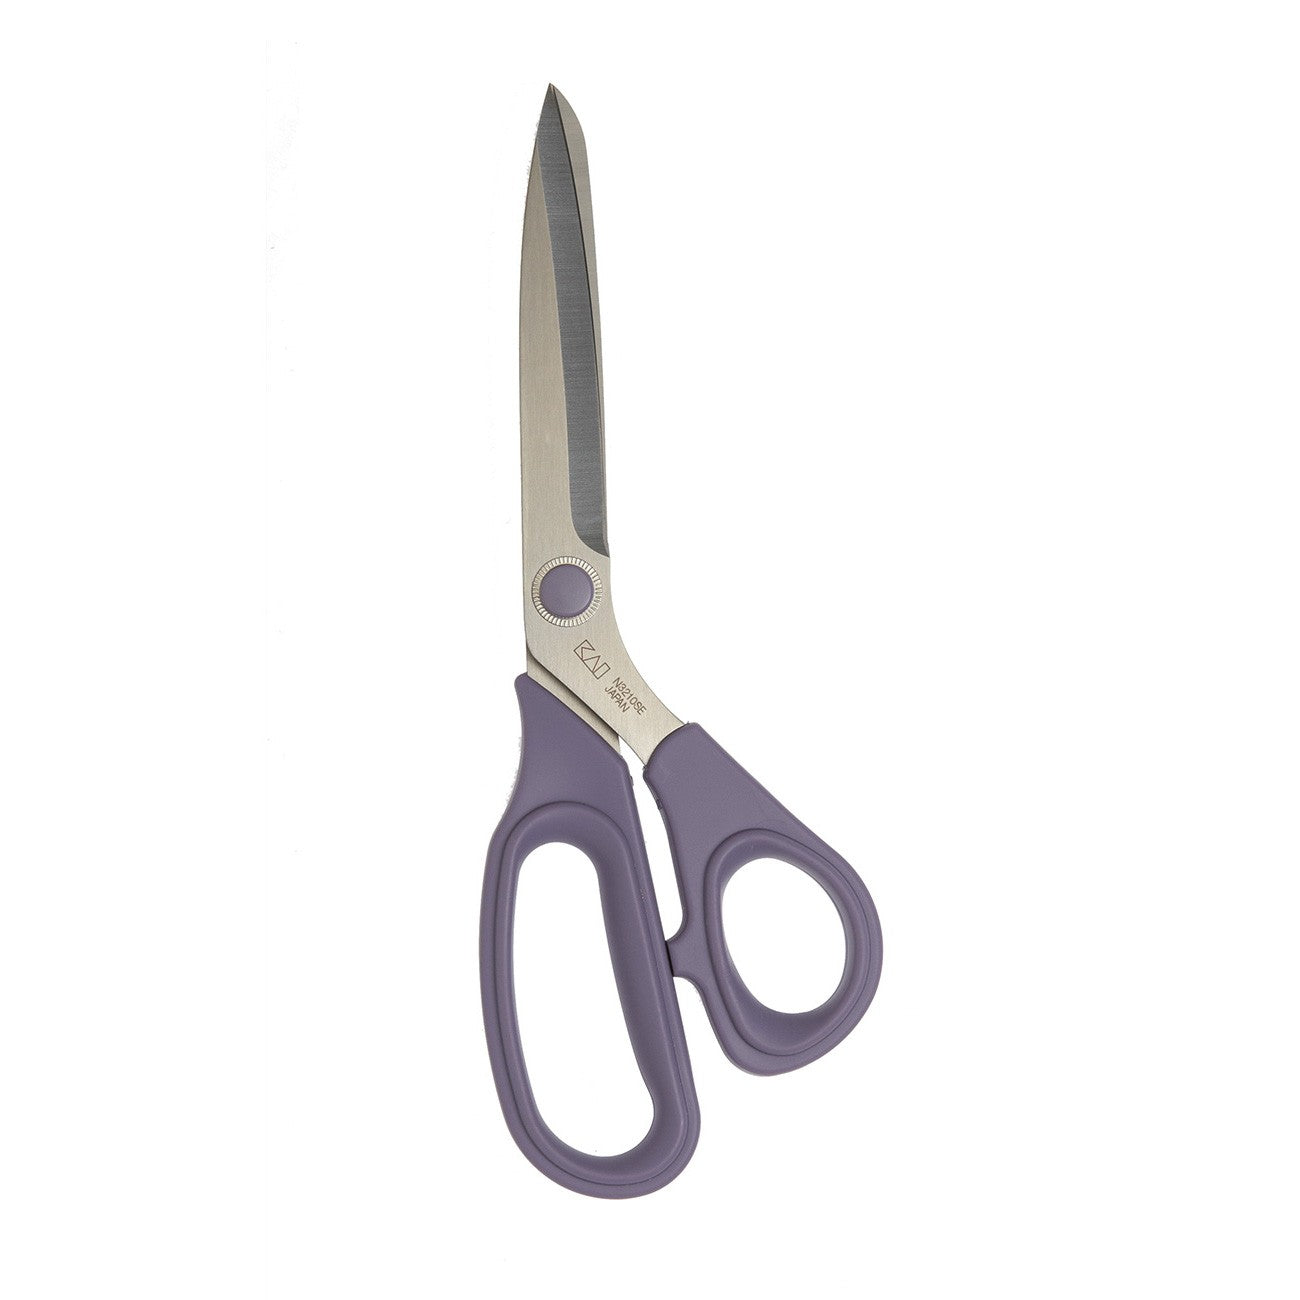 KAI 8 inch Dressmaking Shears - 4901331501784 Quilt in a Day